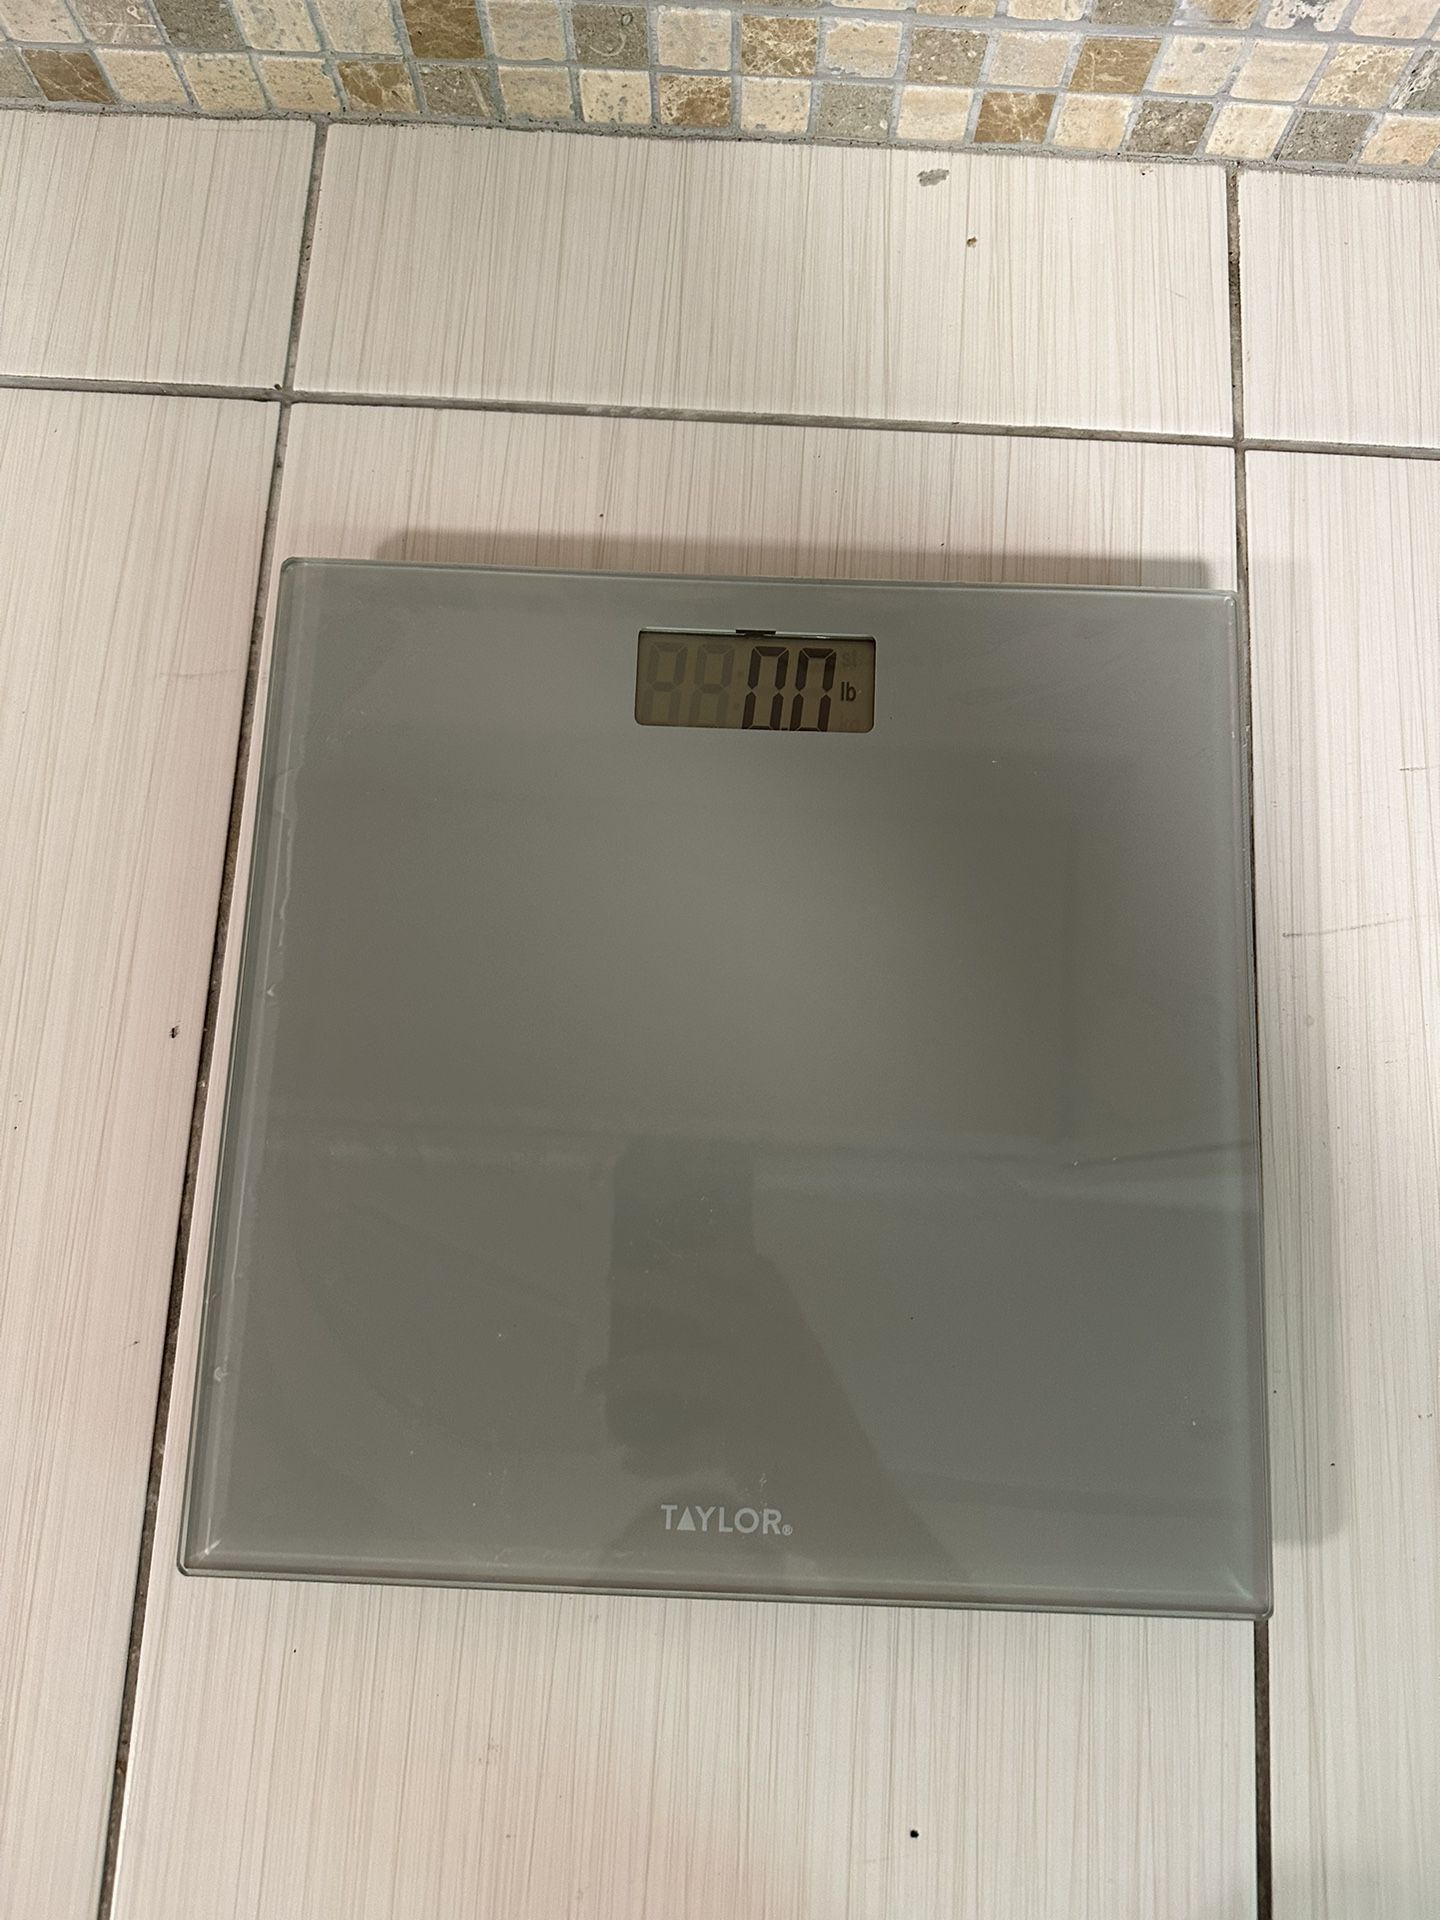 Weight Scale 